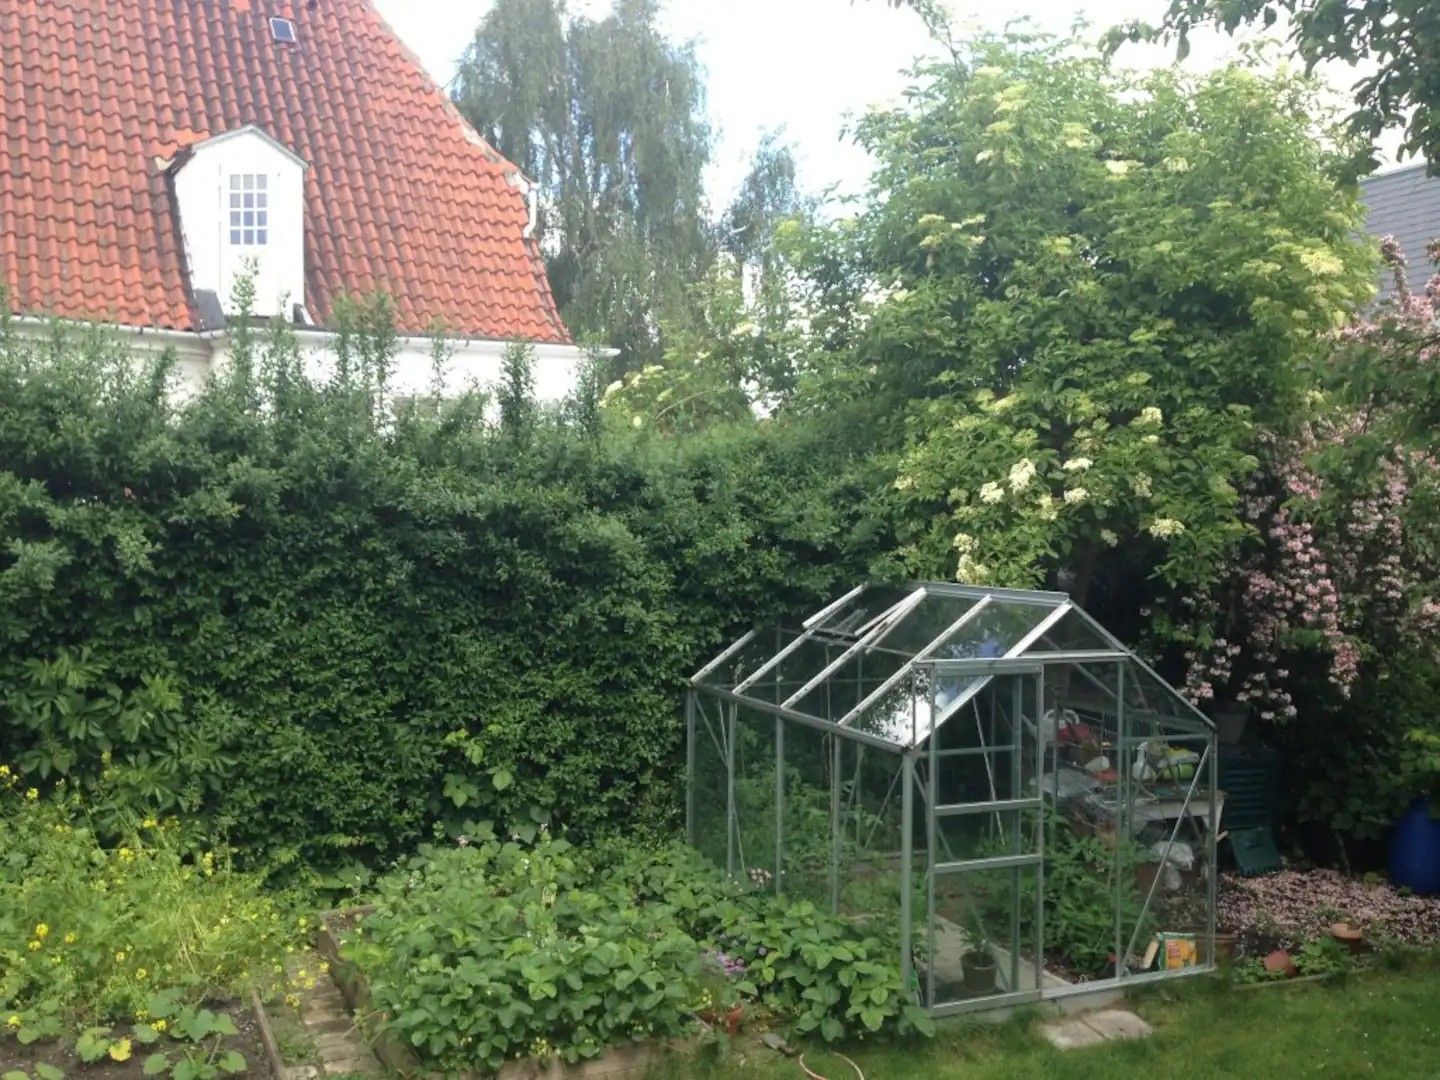 Vegetable garden and green house with tomatoes.jpg